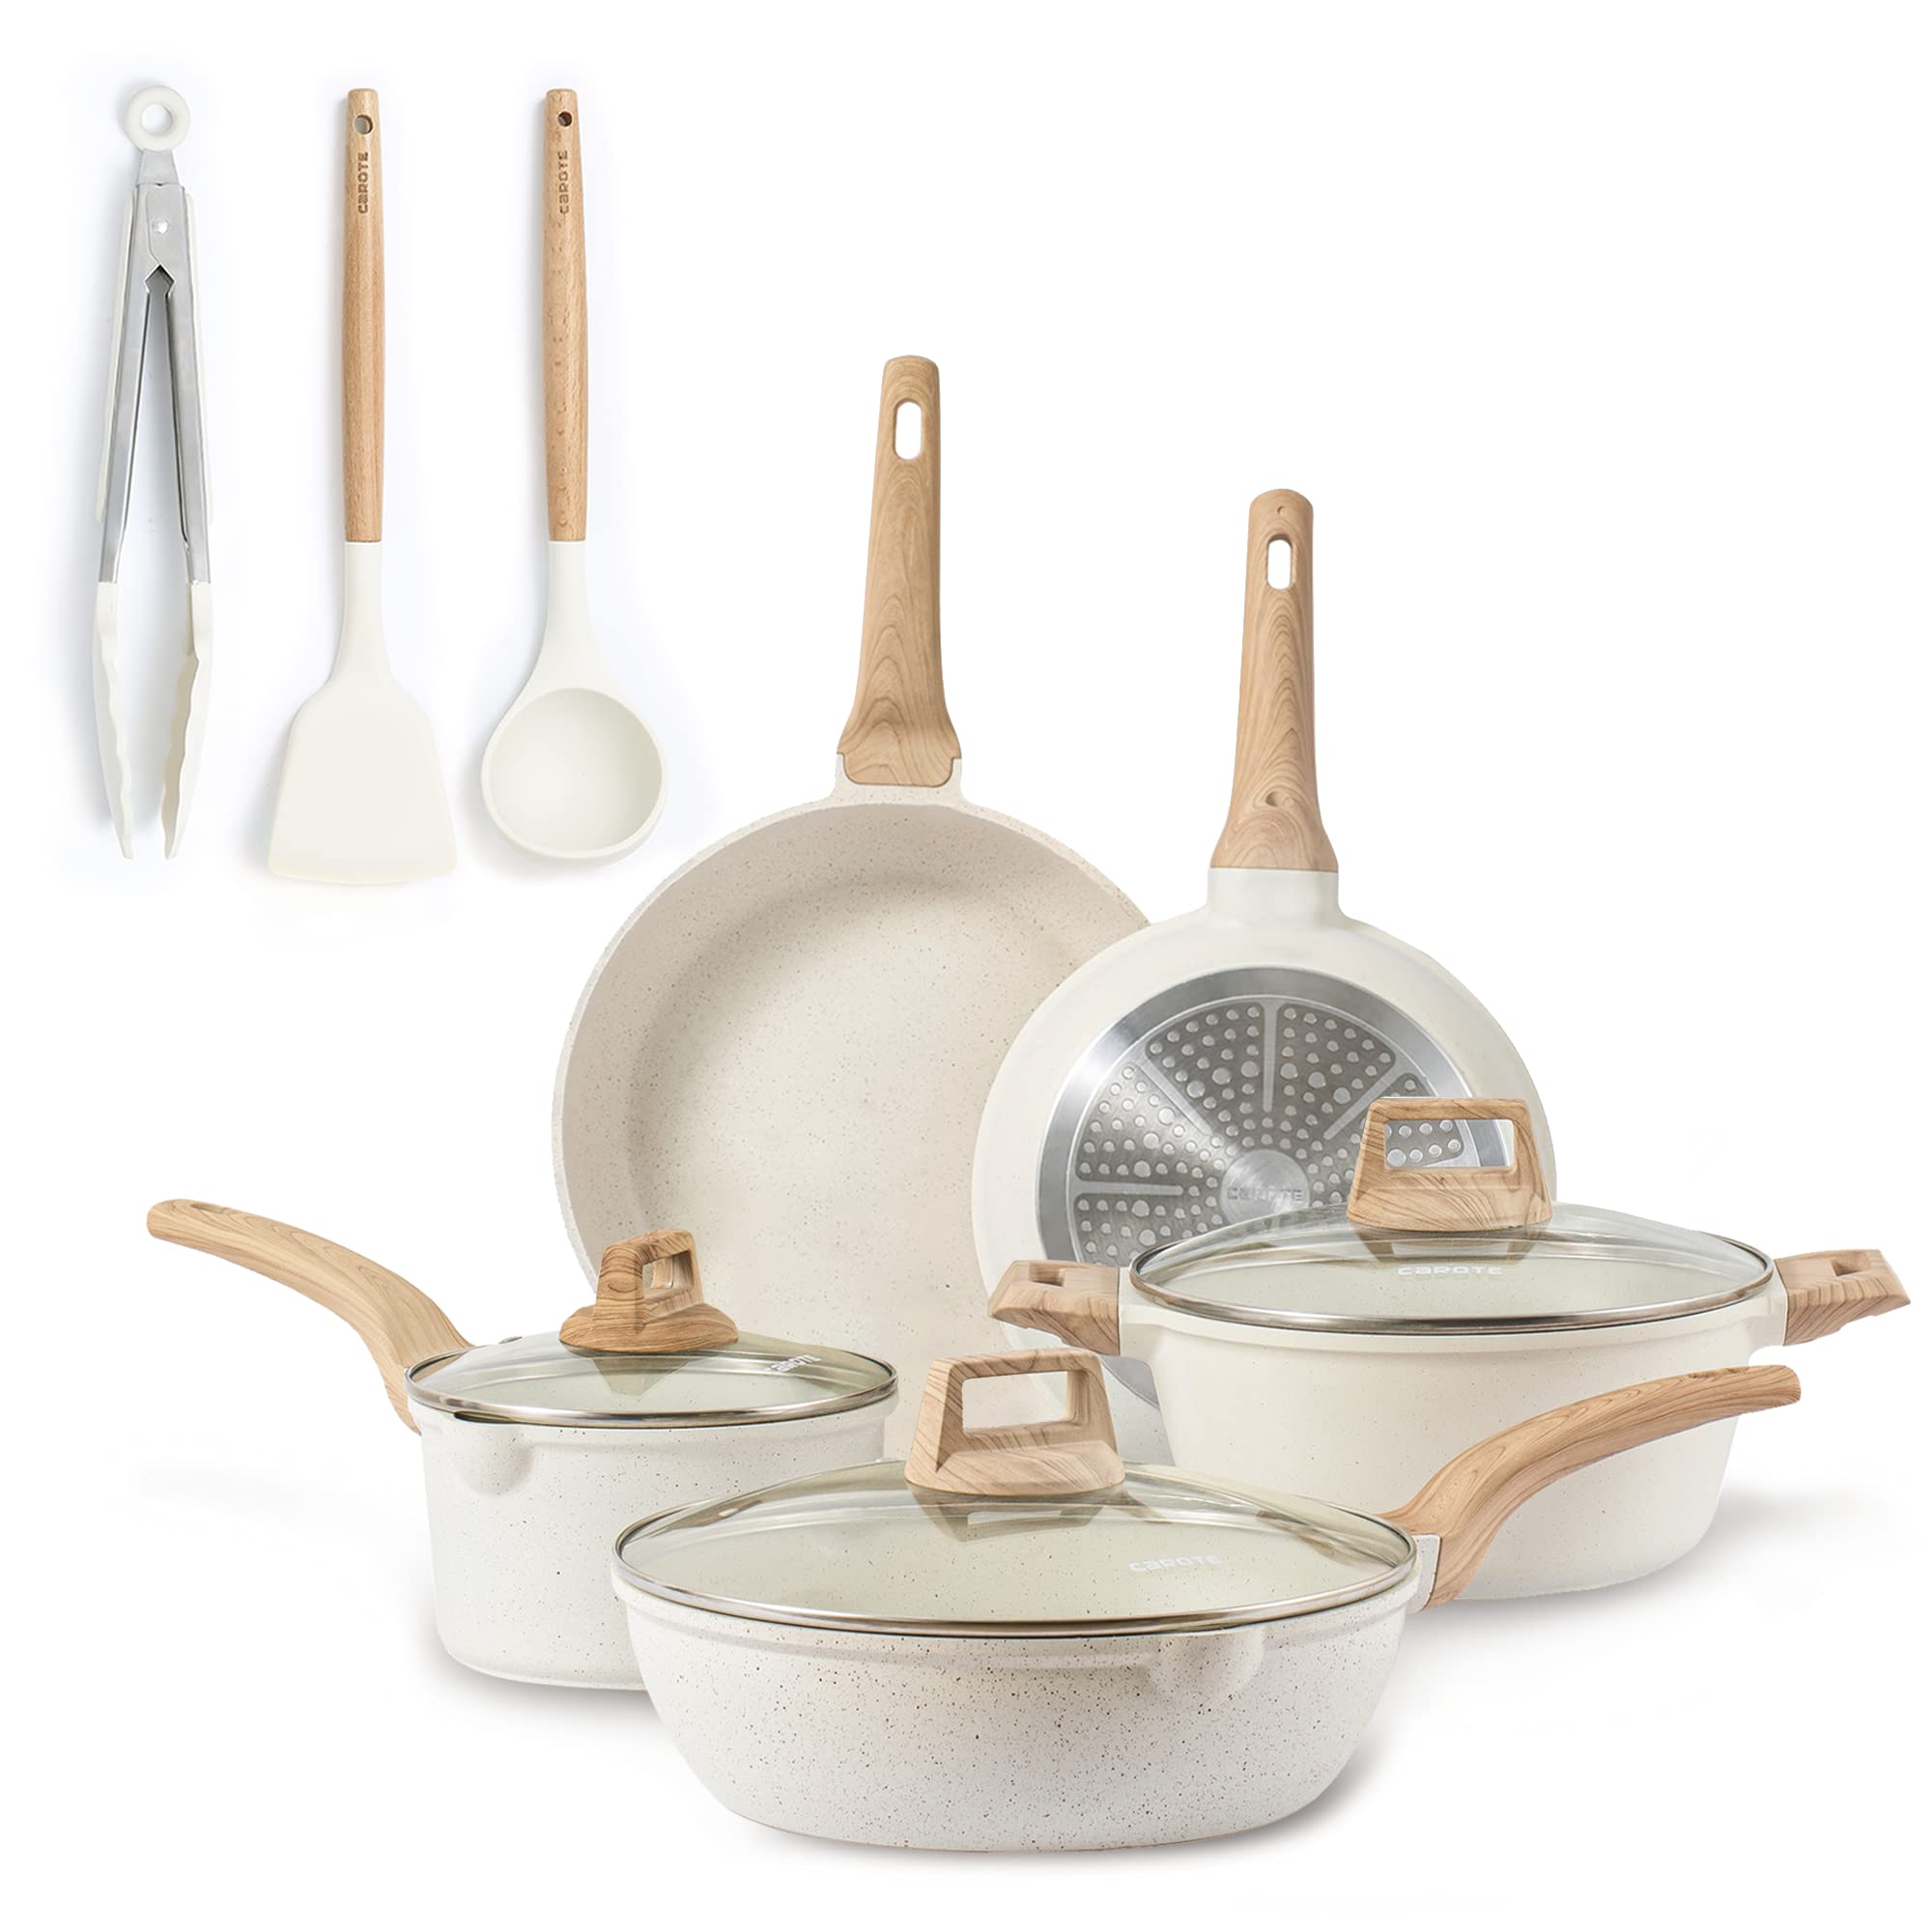 11-Piece Carote Nonstick White Granite Induction Pots & Pans Cookware Set $85 & More + Free Shipping